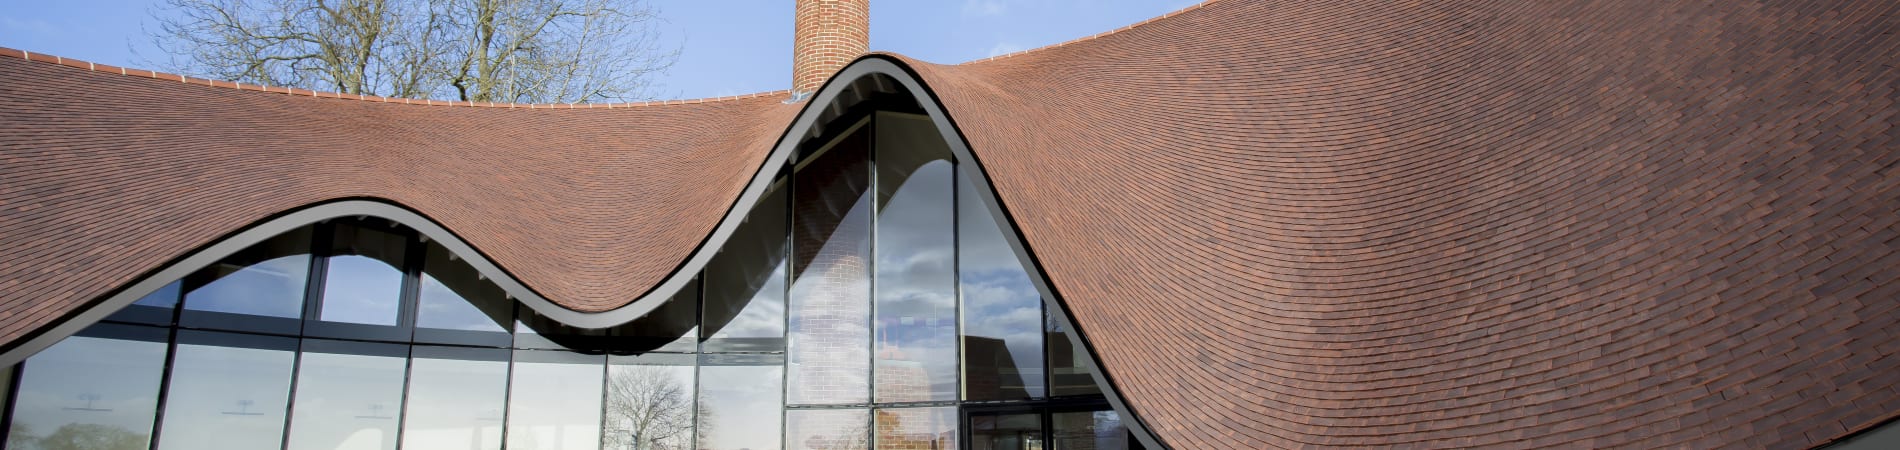 Marshalls plc to acquire leading pitched roof systems manufacturer Marley